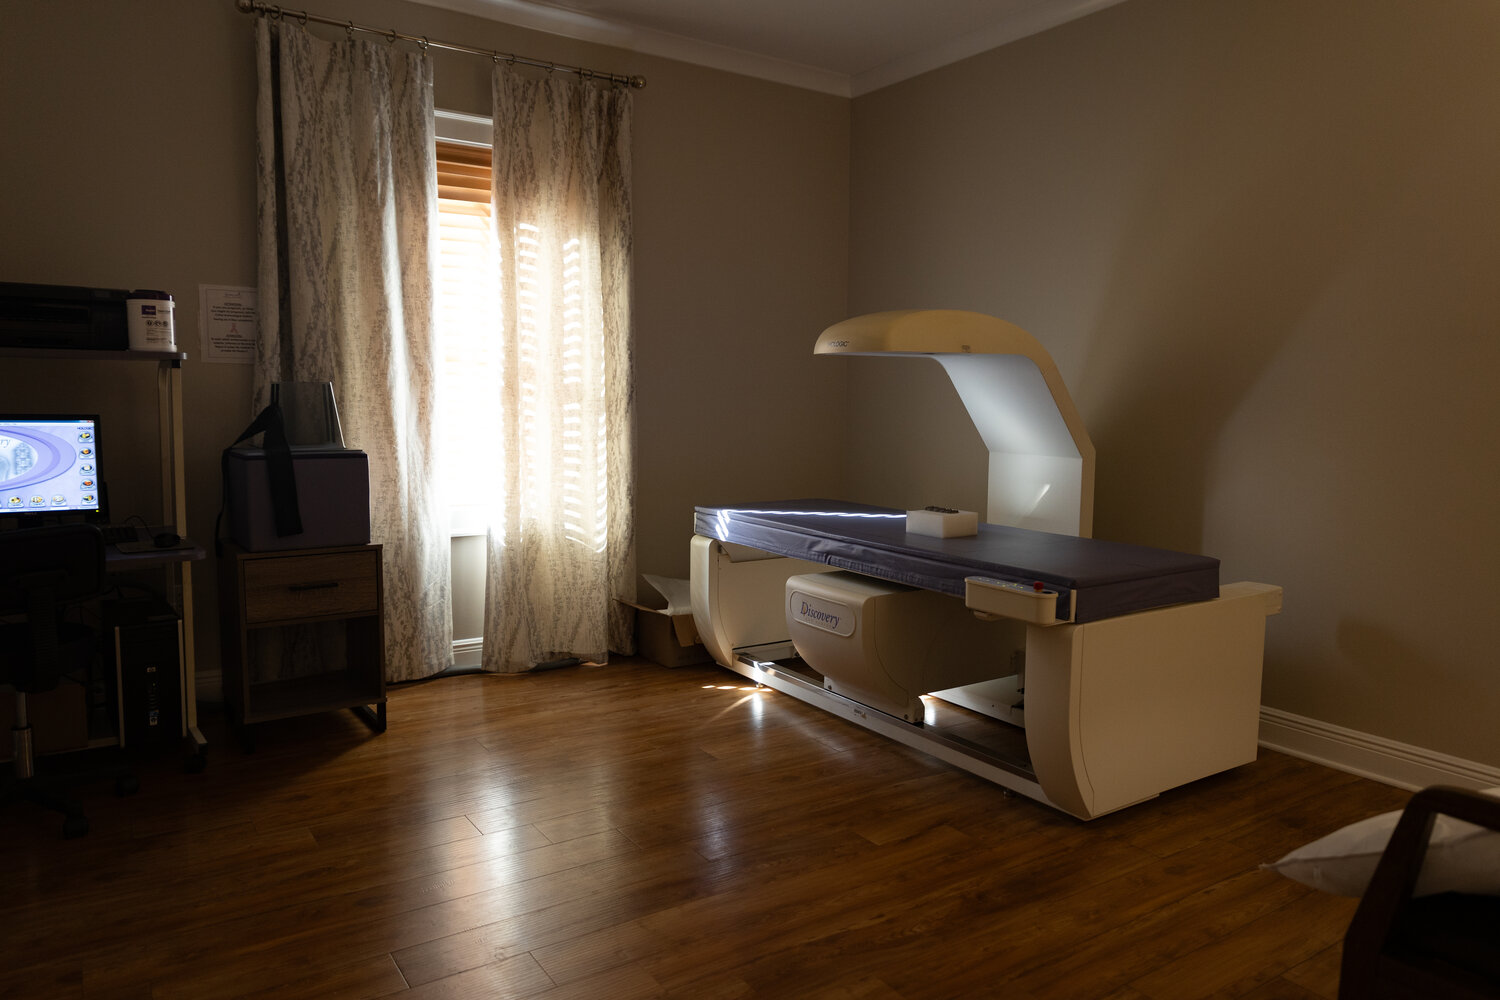 Women’s Imaging Specialists, located in Fairhope and Foley, wants to ensure that their patients have a pleasant and calm experience. Upon entering, Horak explained that each of their facilities have been curated to be warm, calm and inviting.